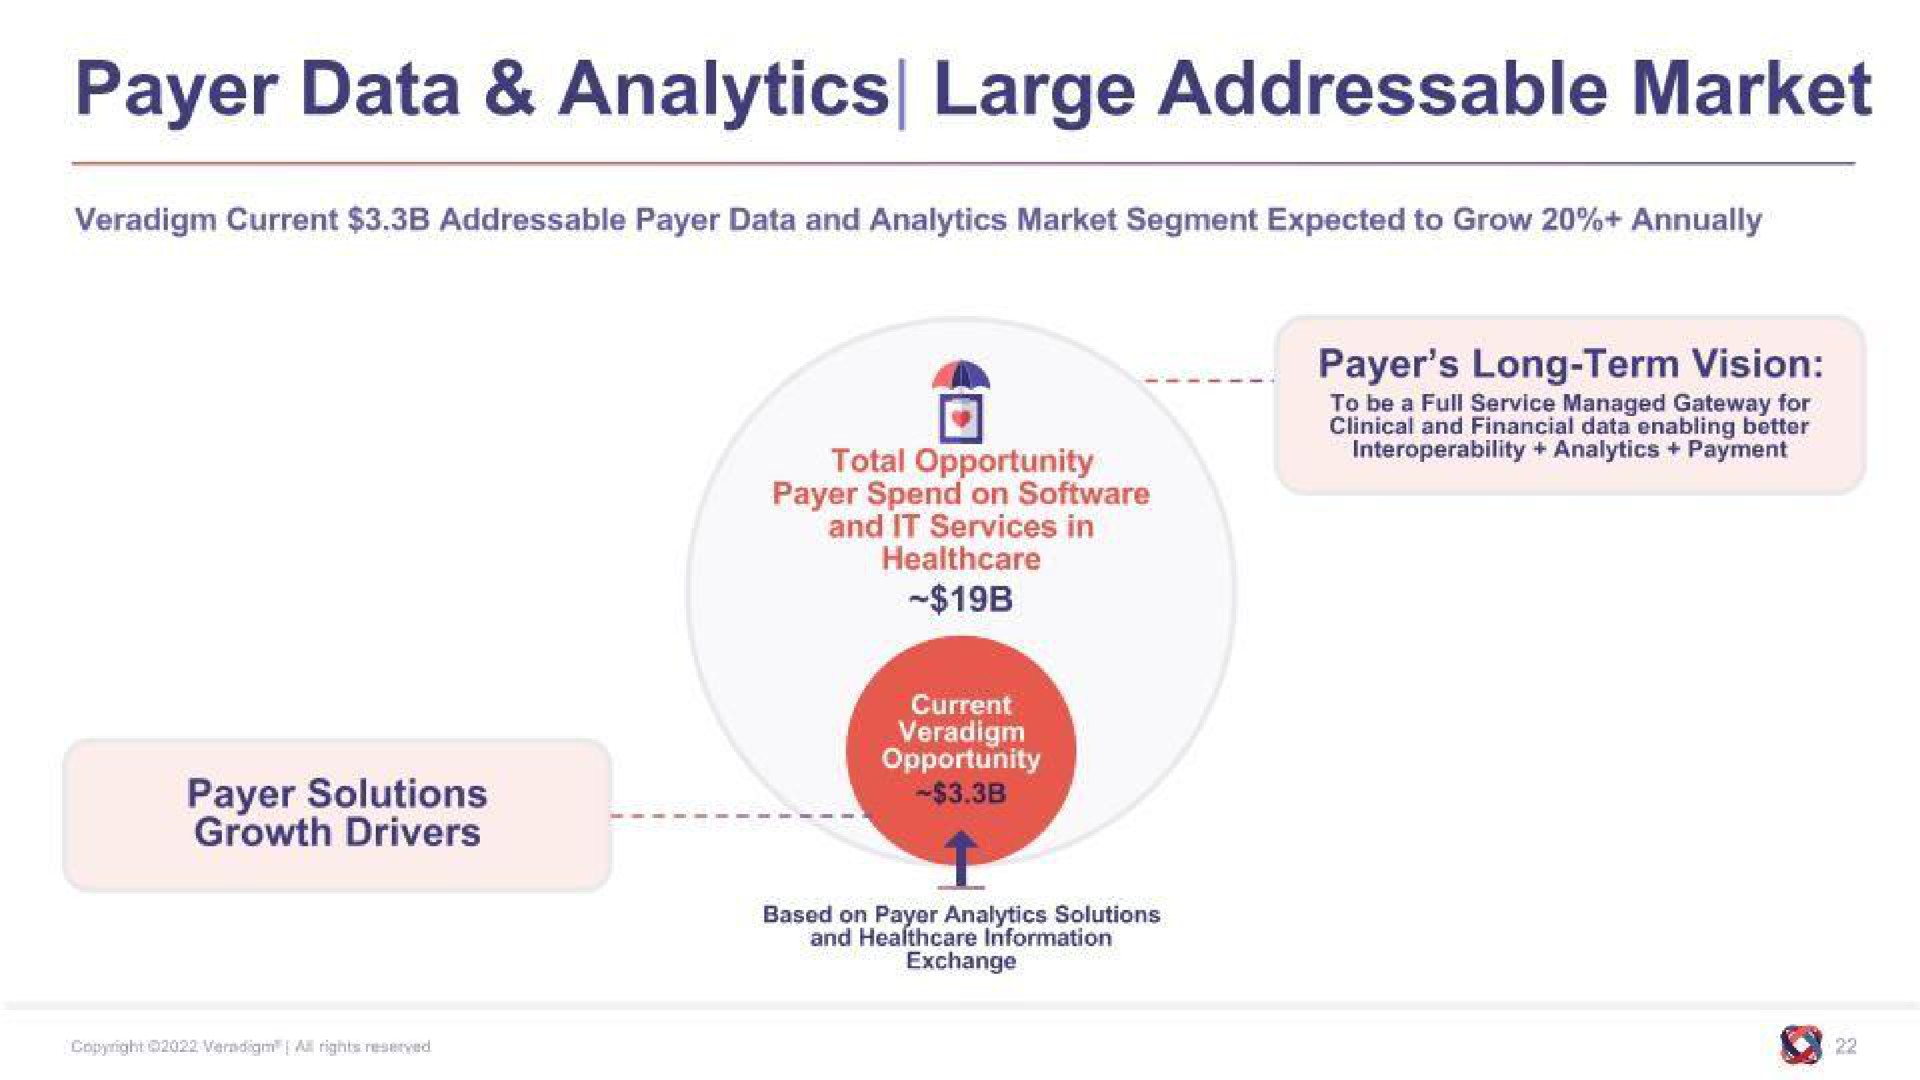 payer data analytics large market | Allscripts Healthcare Solutions